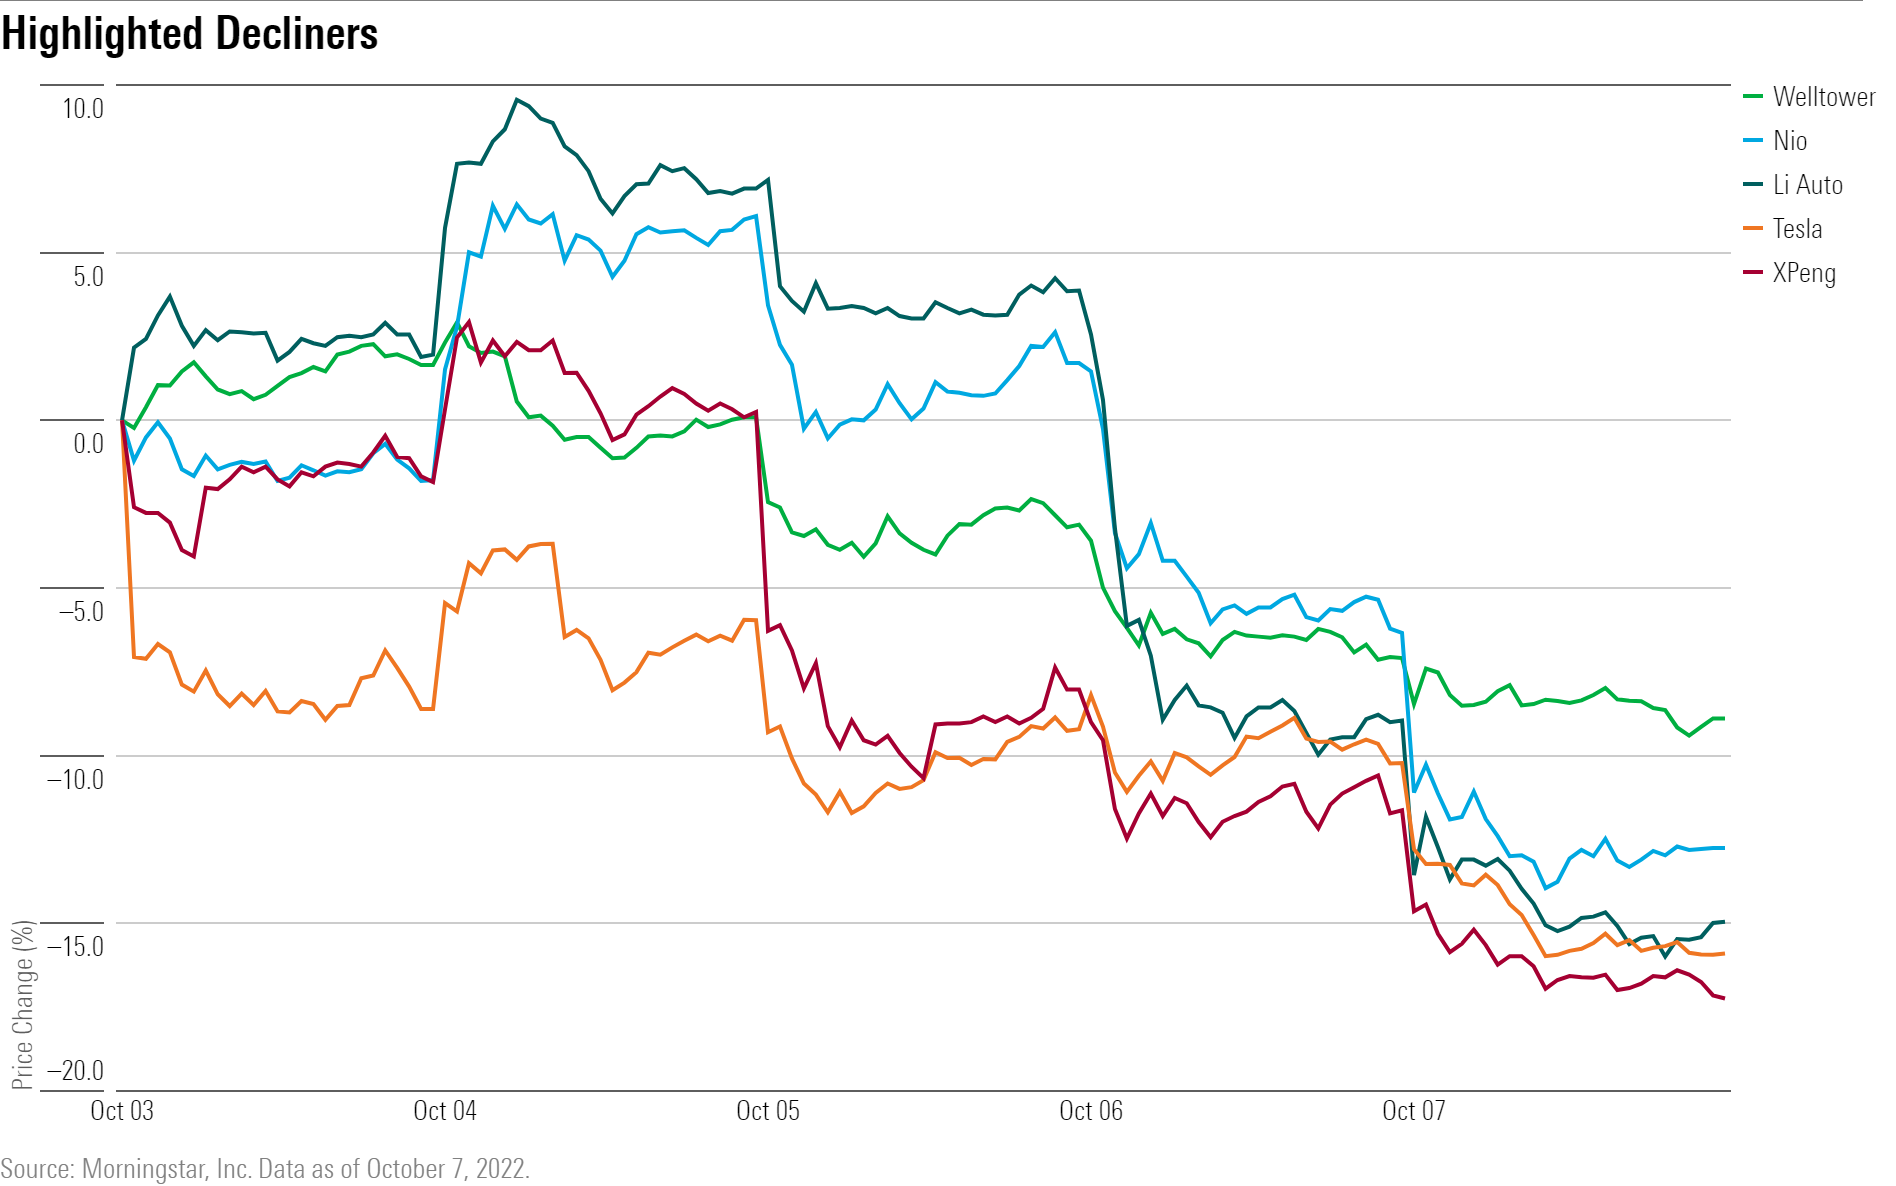 A line chart showing the performance of TSLA, XPEV, LI, NIO, and WELL.